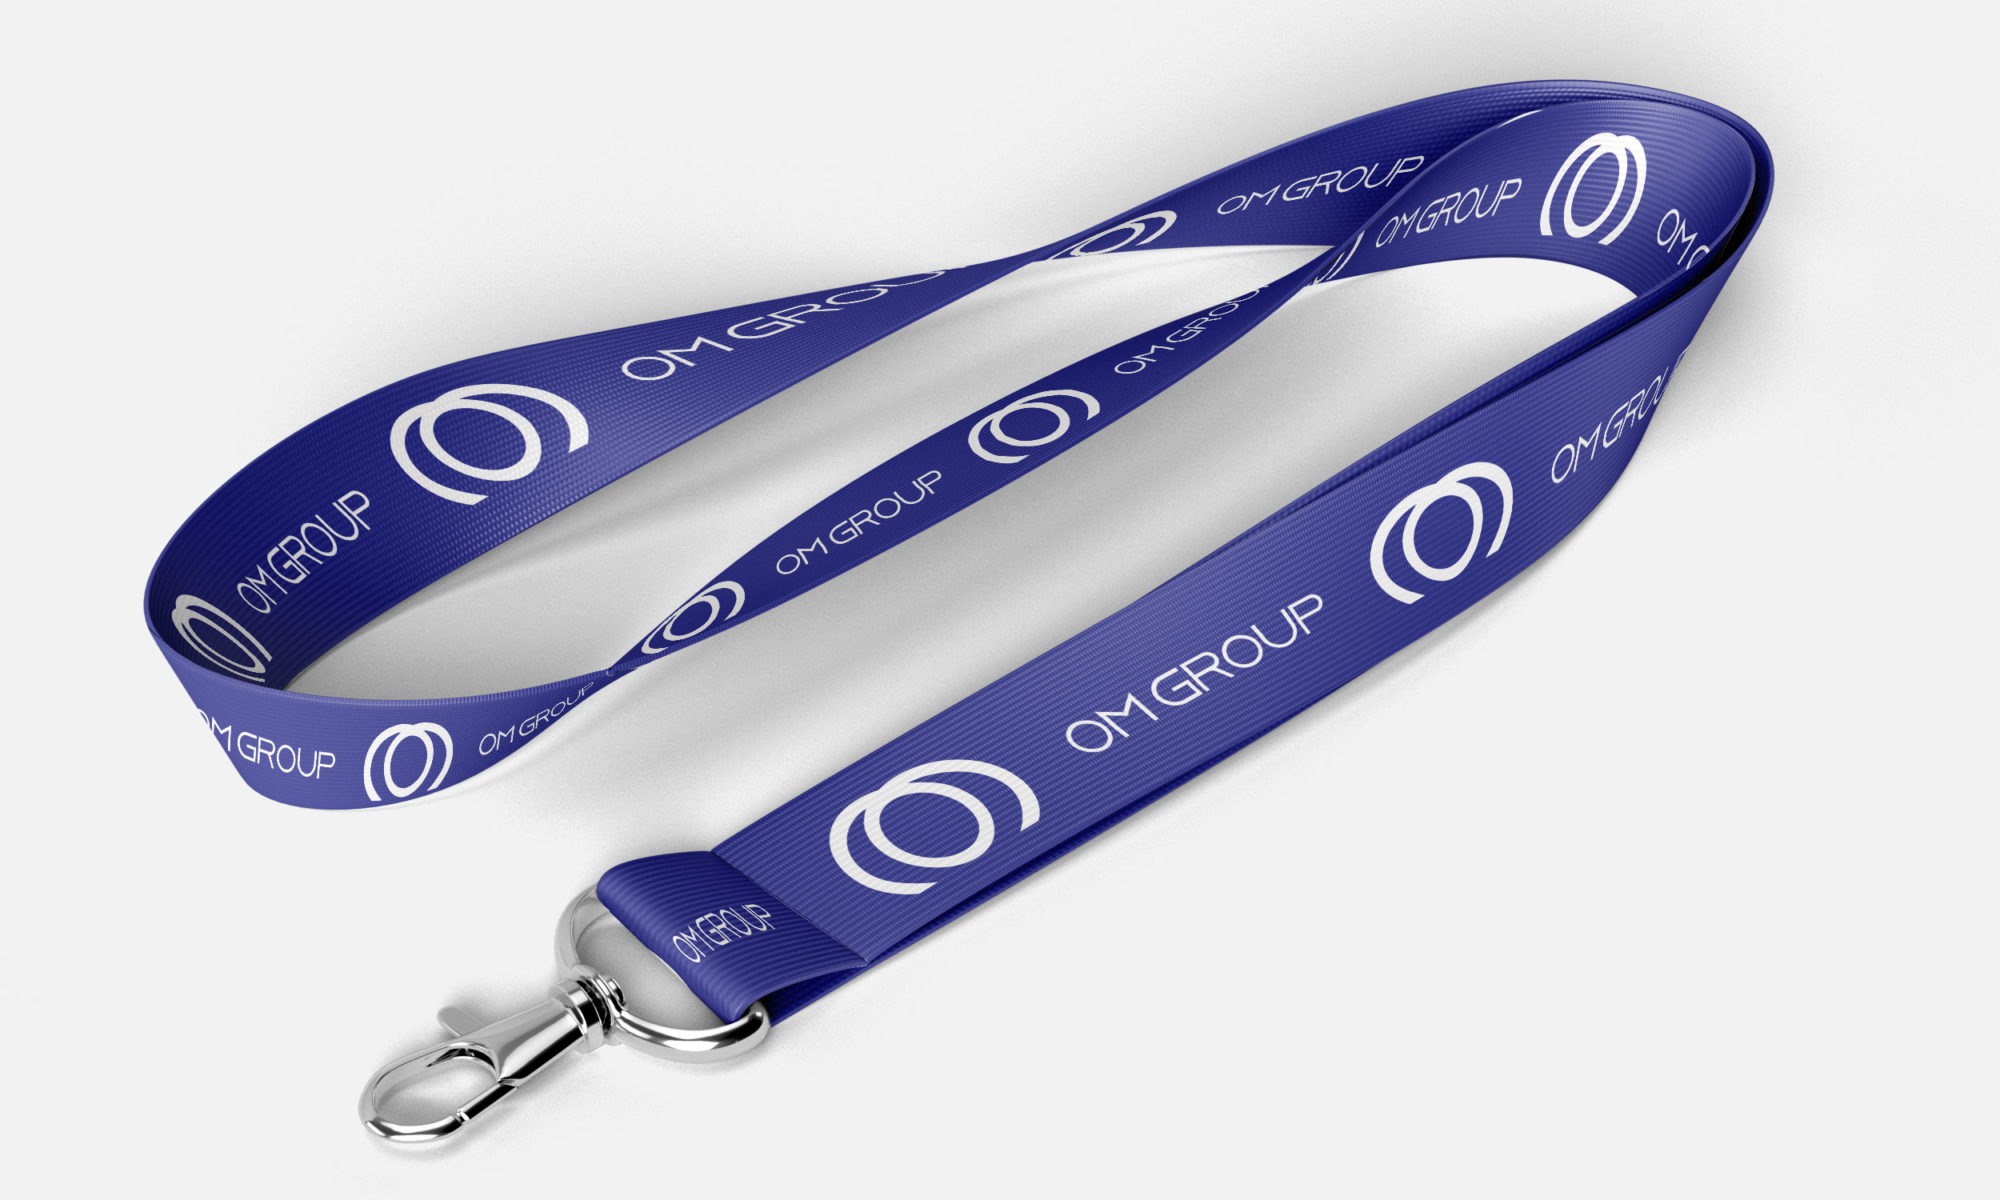 Om group identity card lanyard design with new logo by HDegree